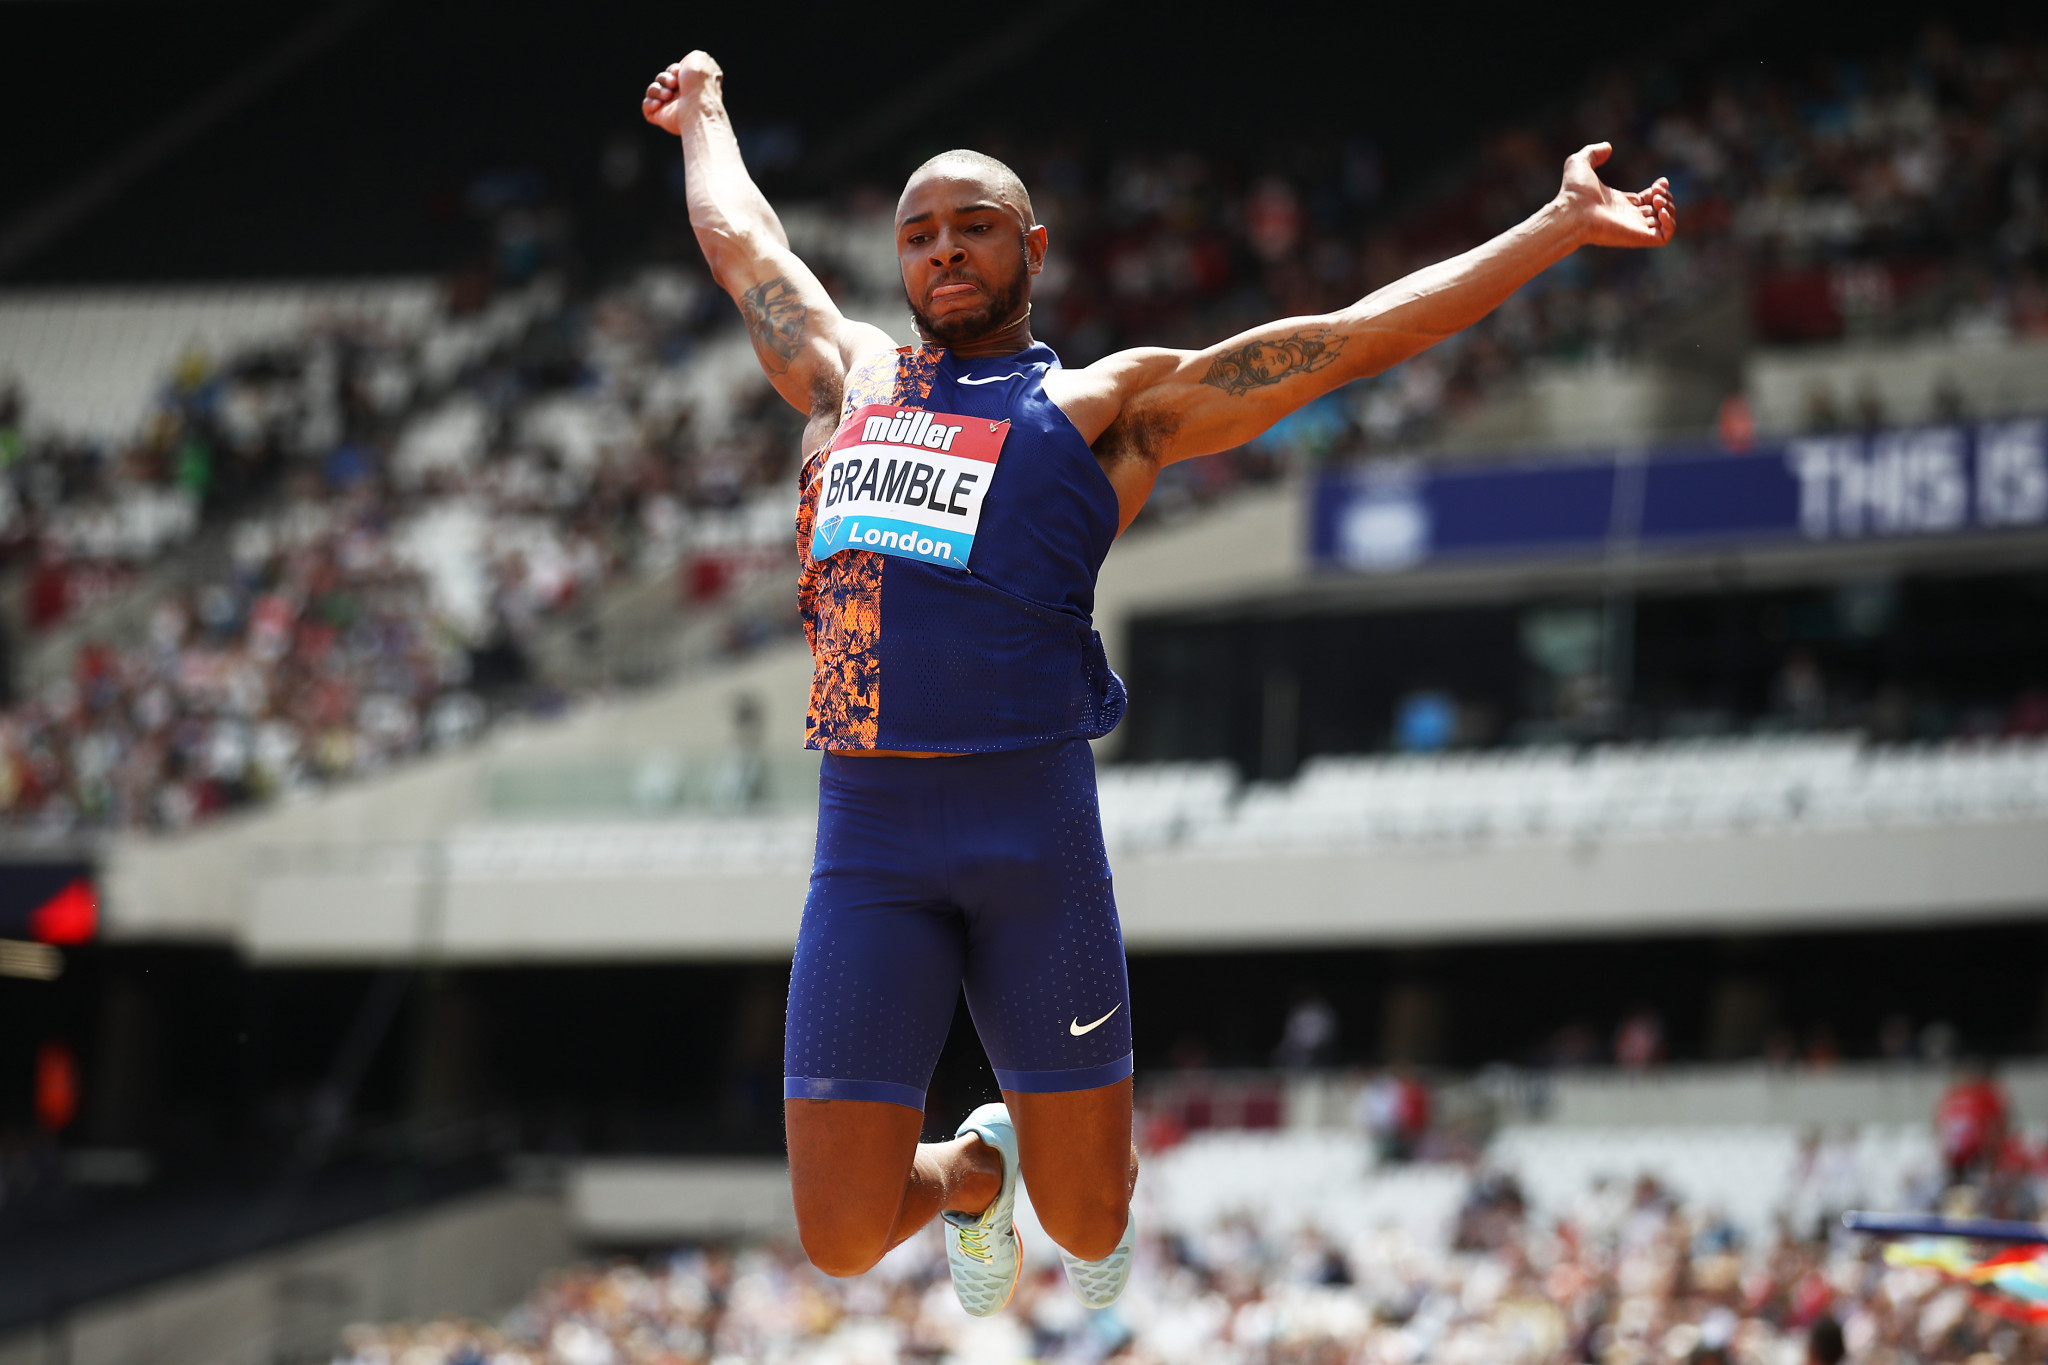 British long jumper Daniel Bramble has reached a fundraising goal for the Tokyo 2020 Olympic Games ©Getty Images